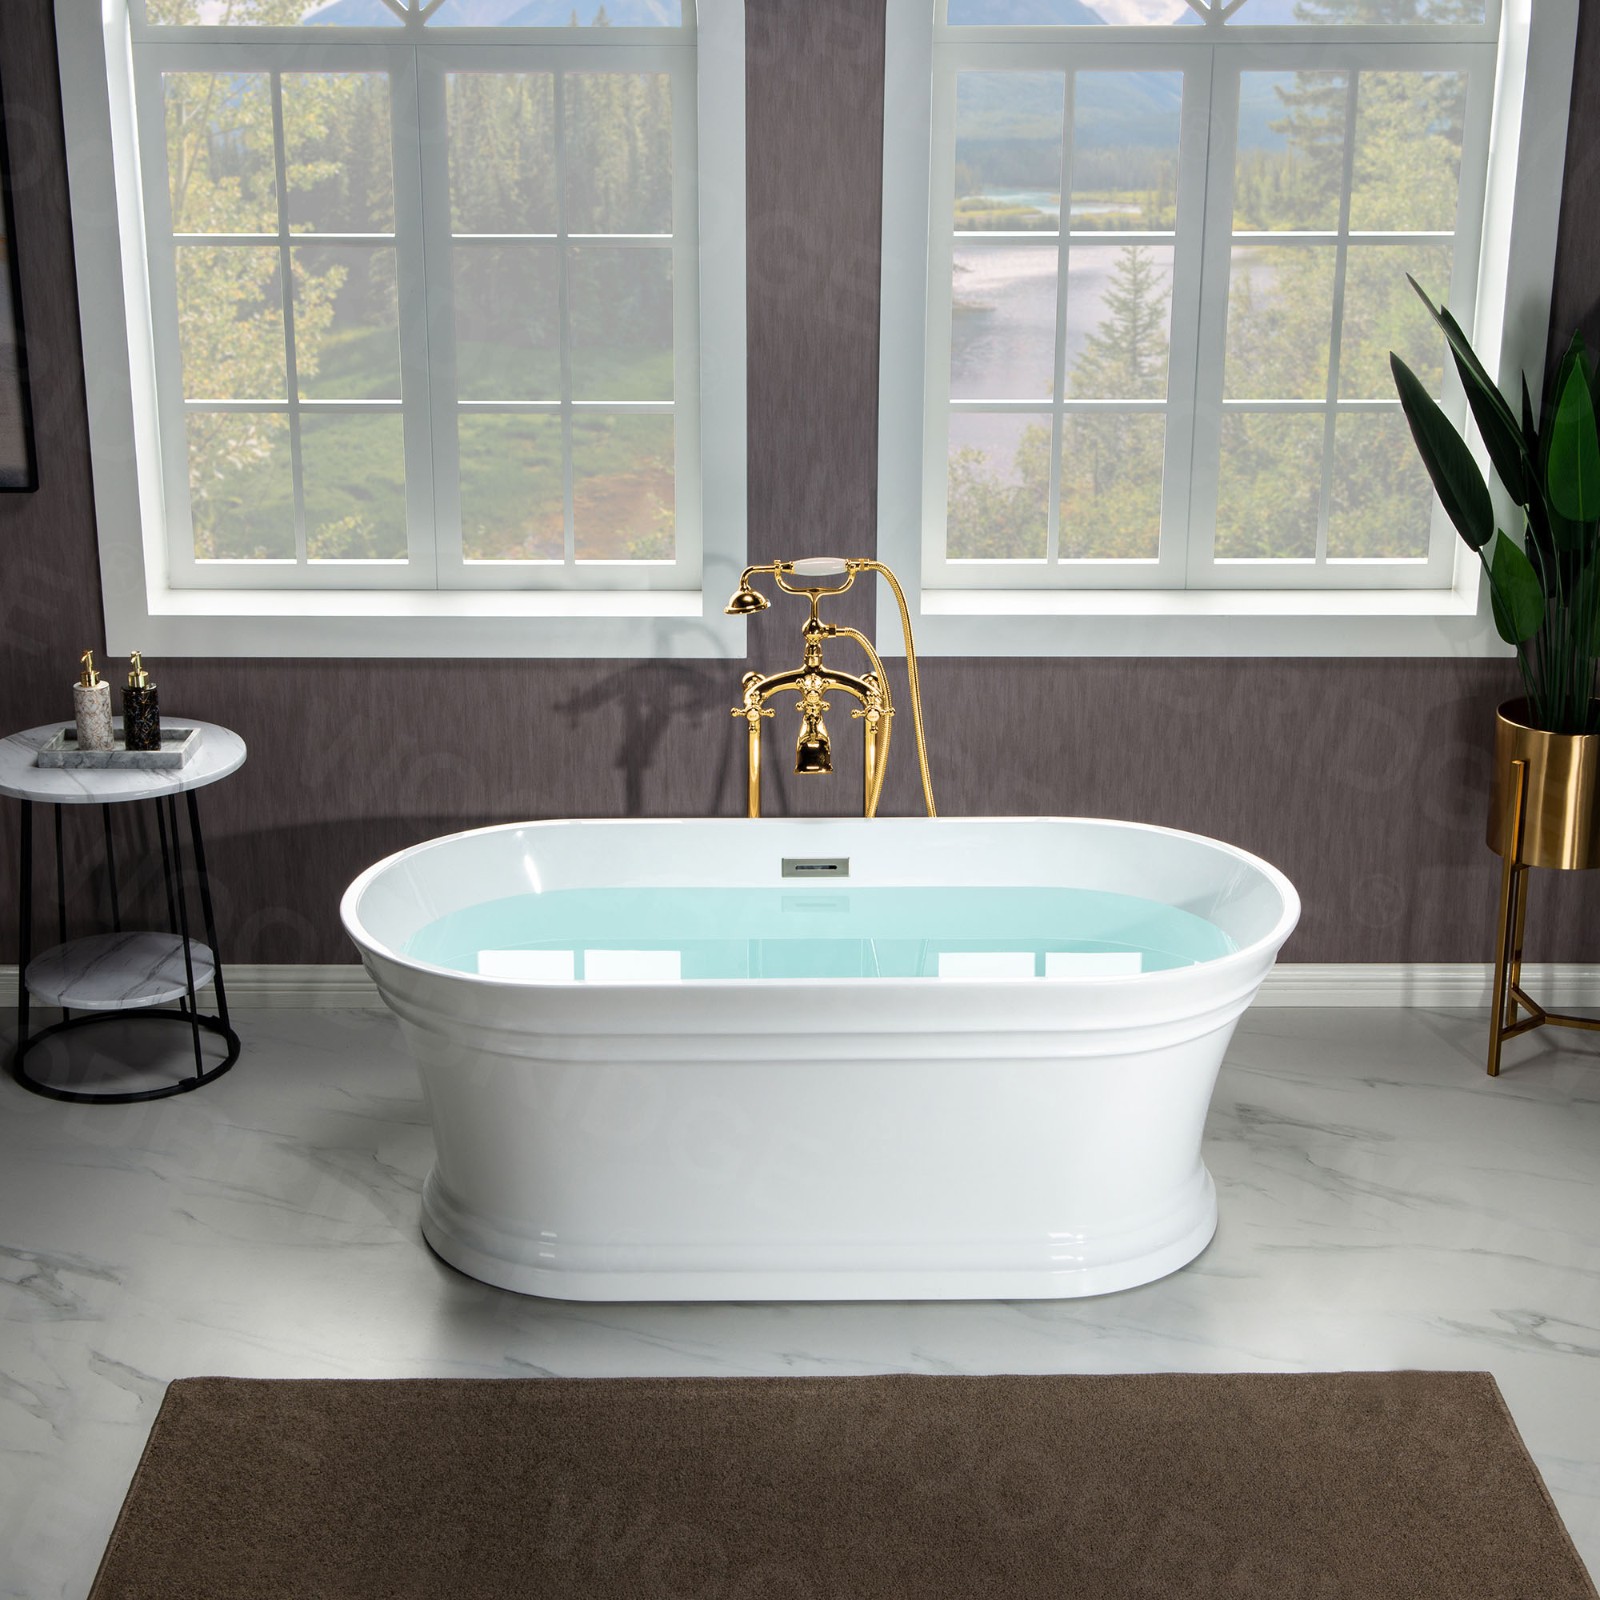  WOODBRIDGE 59 in. Freestanding Double Ended Acrylic Soaking Bathtub with Center Drain Assembly and Overflow, BTA1536/B1536, Glossy White_7796